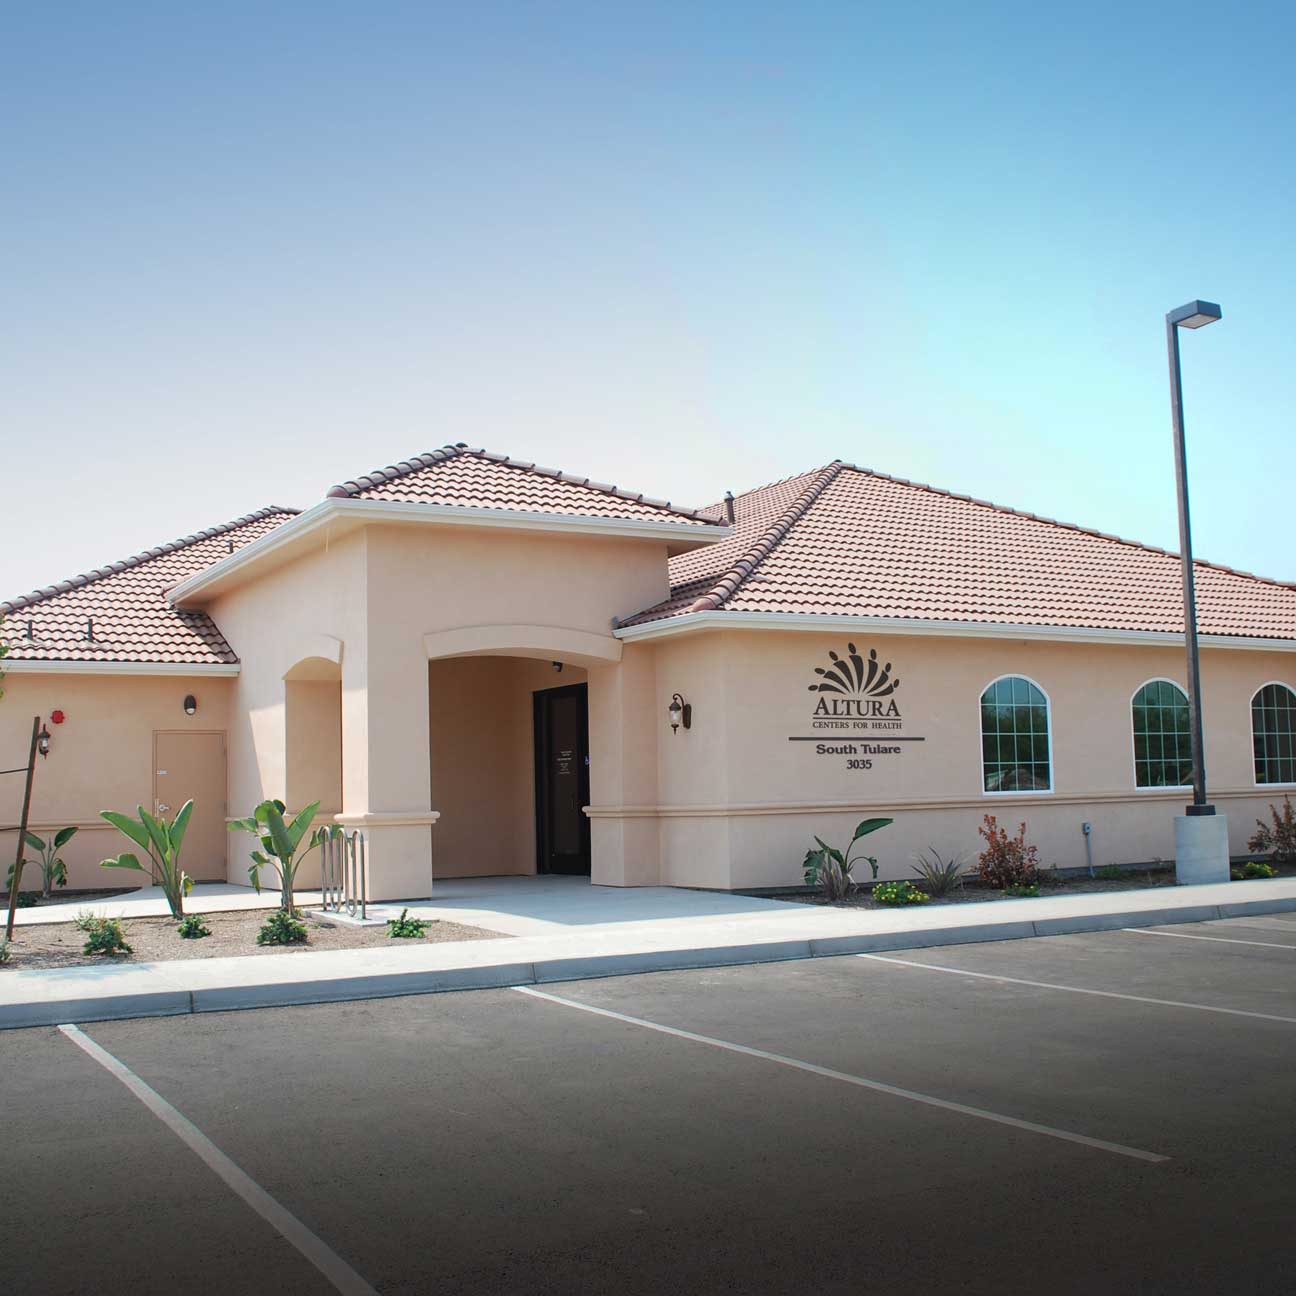 Altura Centers for Health - South Tulare